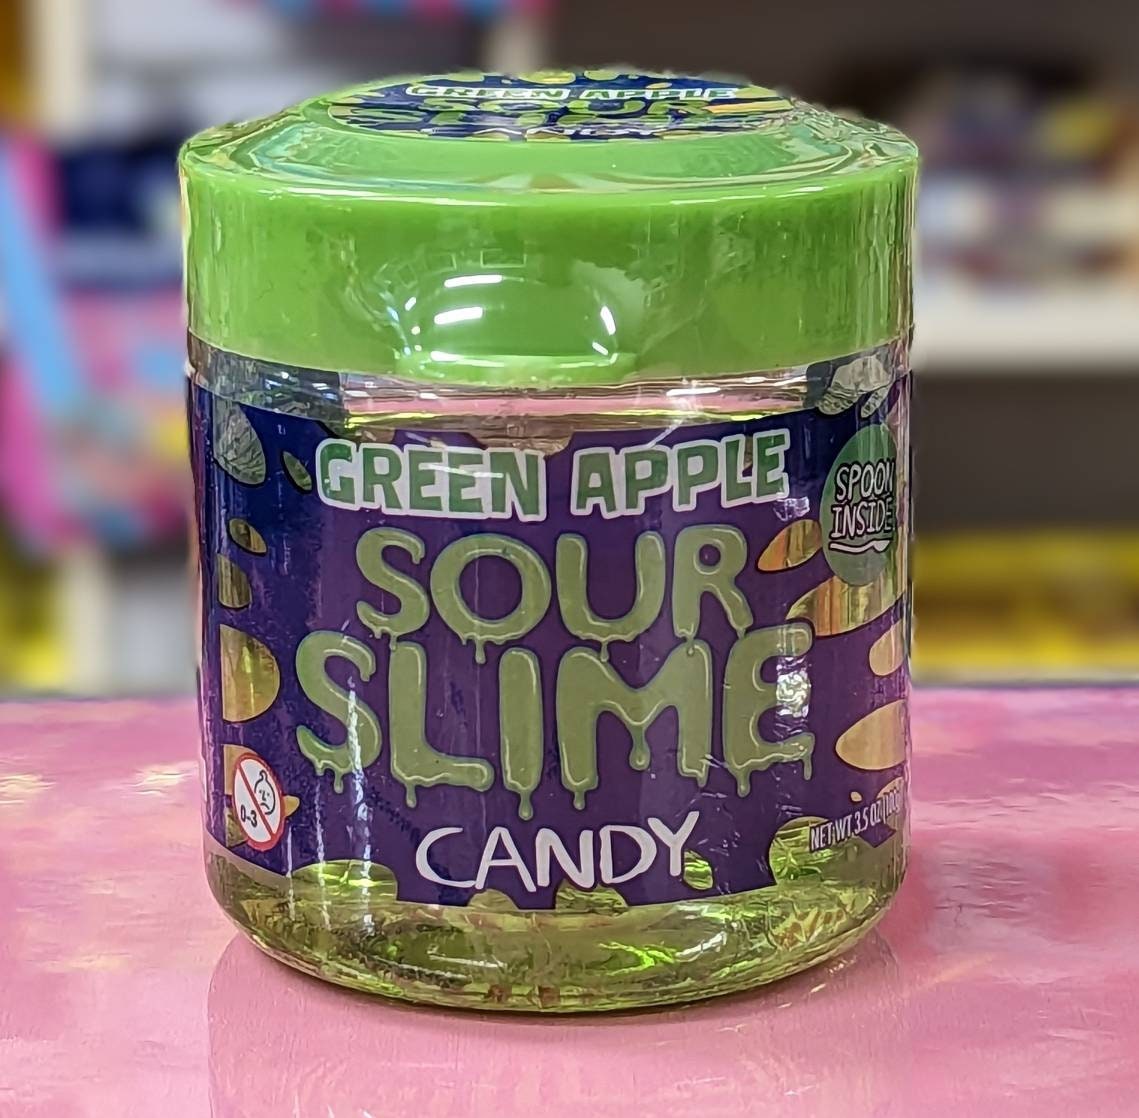 Green Apple Sour Slime Candy by Boston America USA Import 100g Includes a  Small Spoon. -  UK